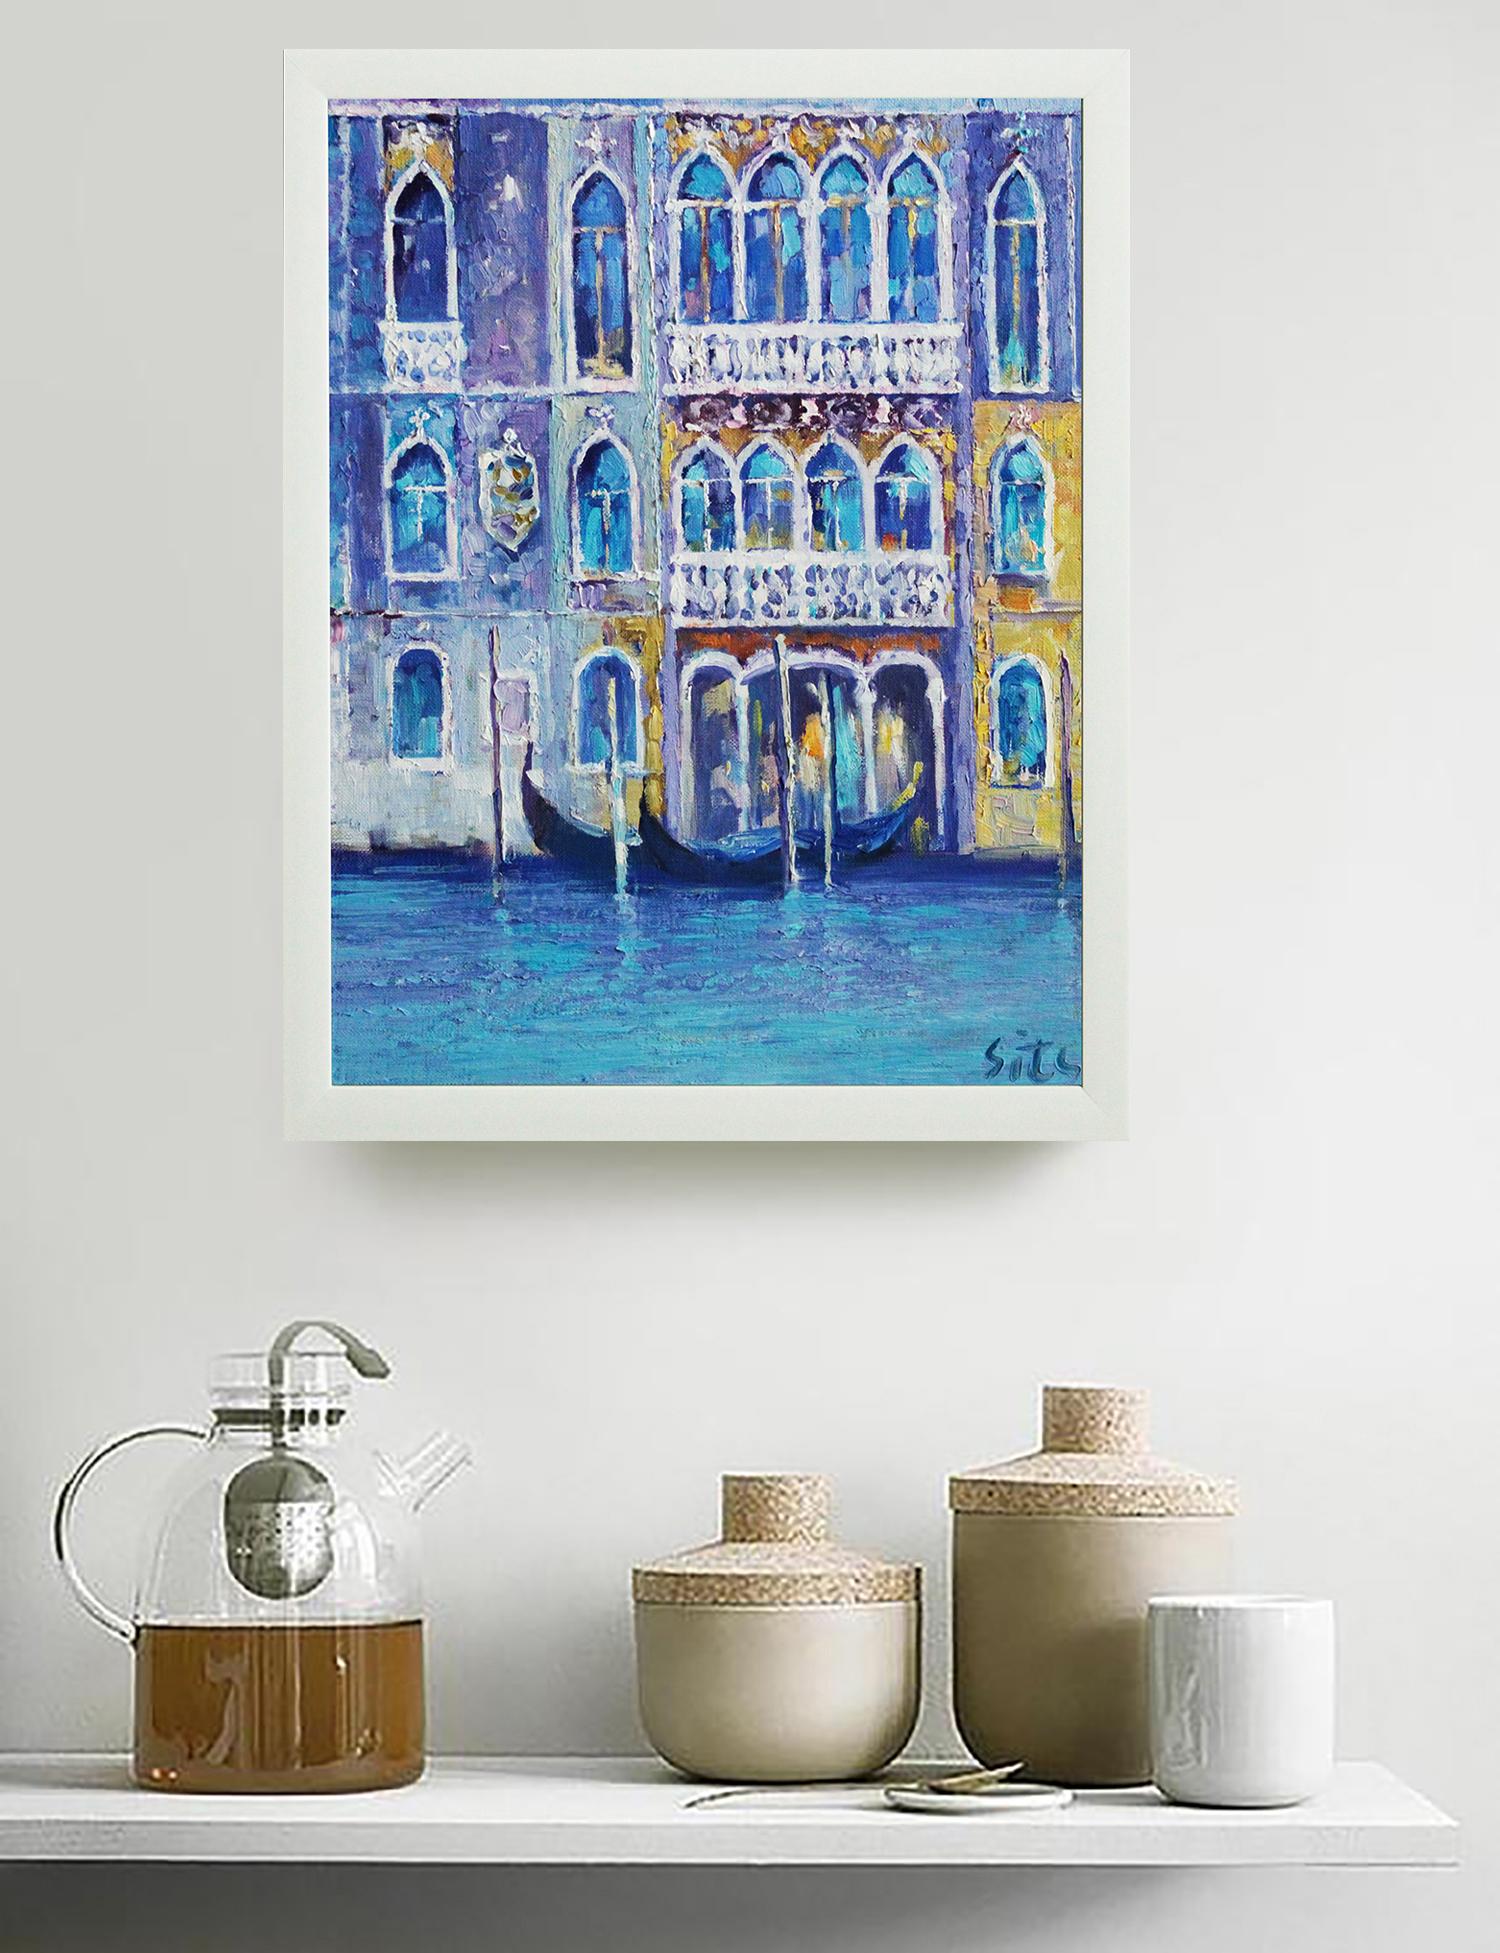 Fragments of Venice - American Realist Painting by Andrei Sitsko